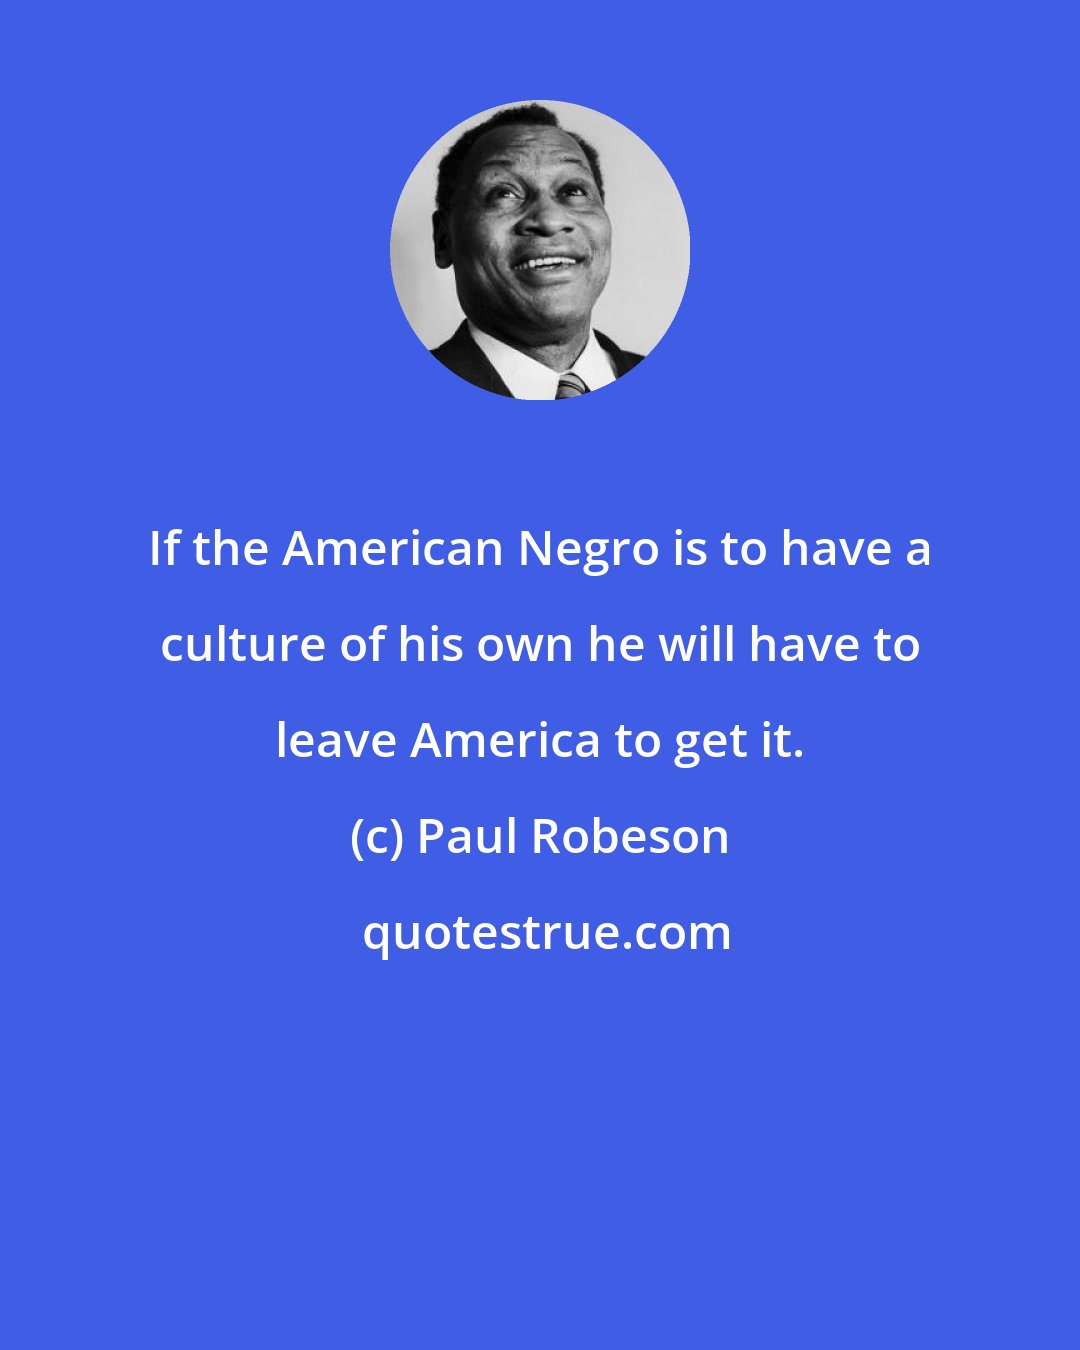 Paul Robeson: If the American Negro is to have a culture of his own he will have to leave America to get it.